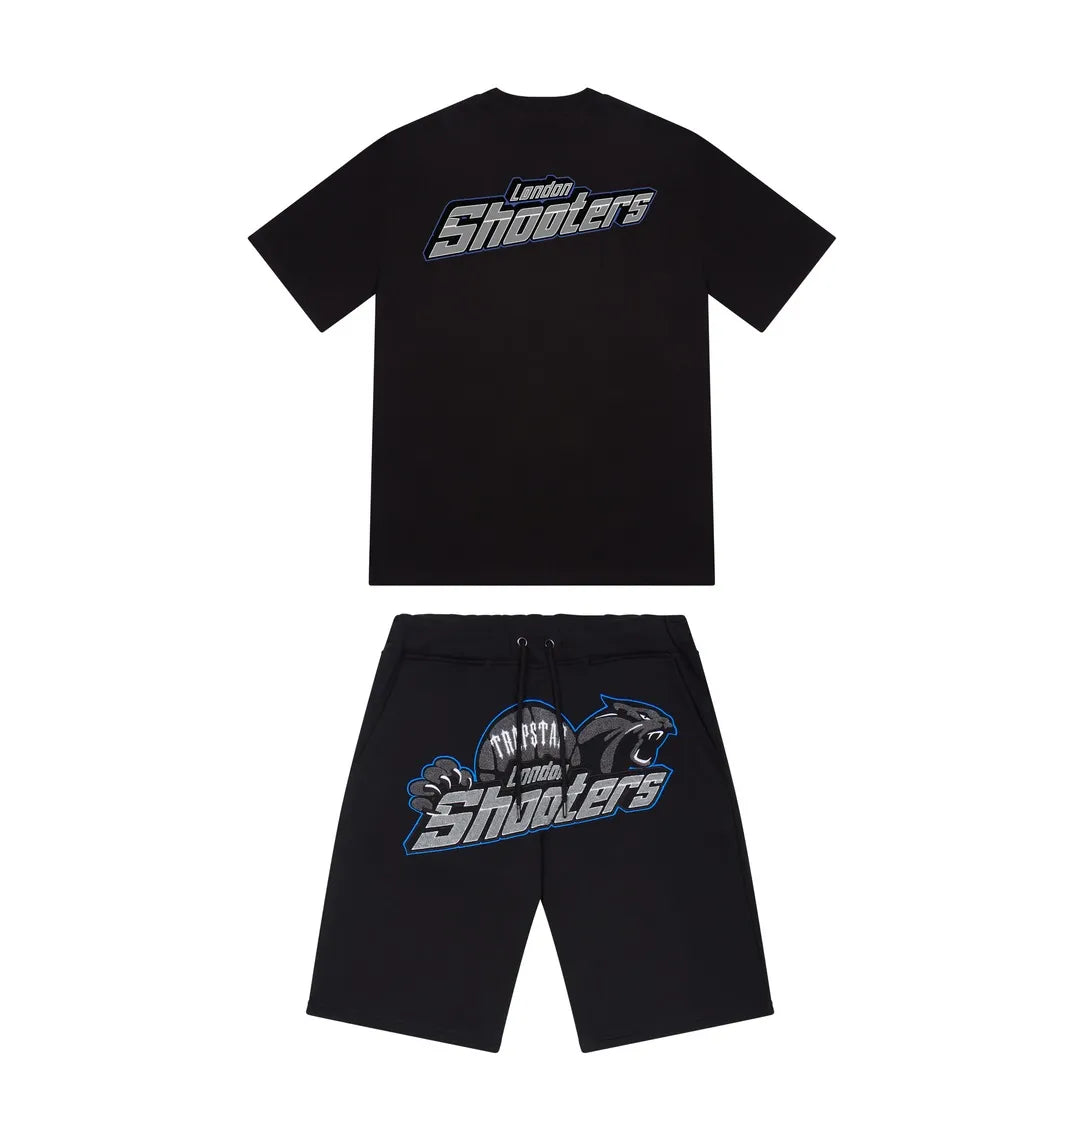 Trapstar Shooters Short Set - Black Ice Flavours